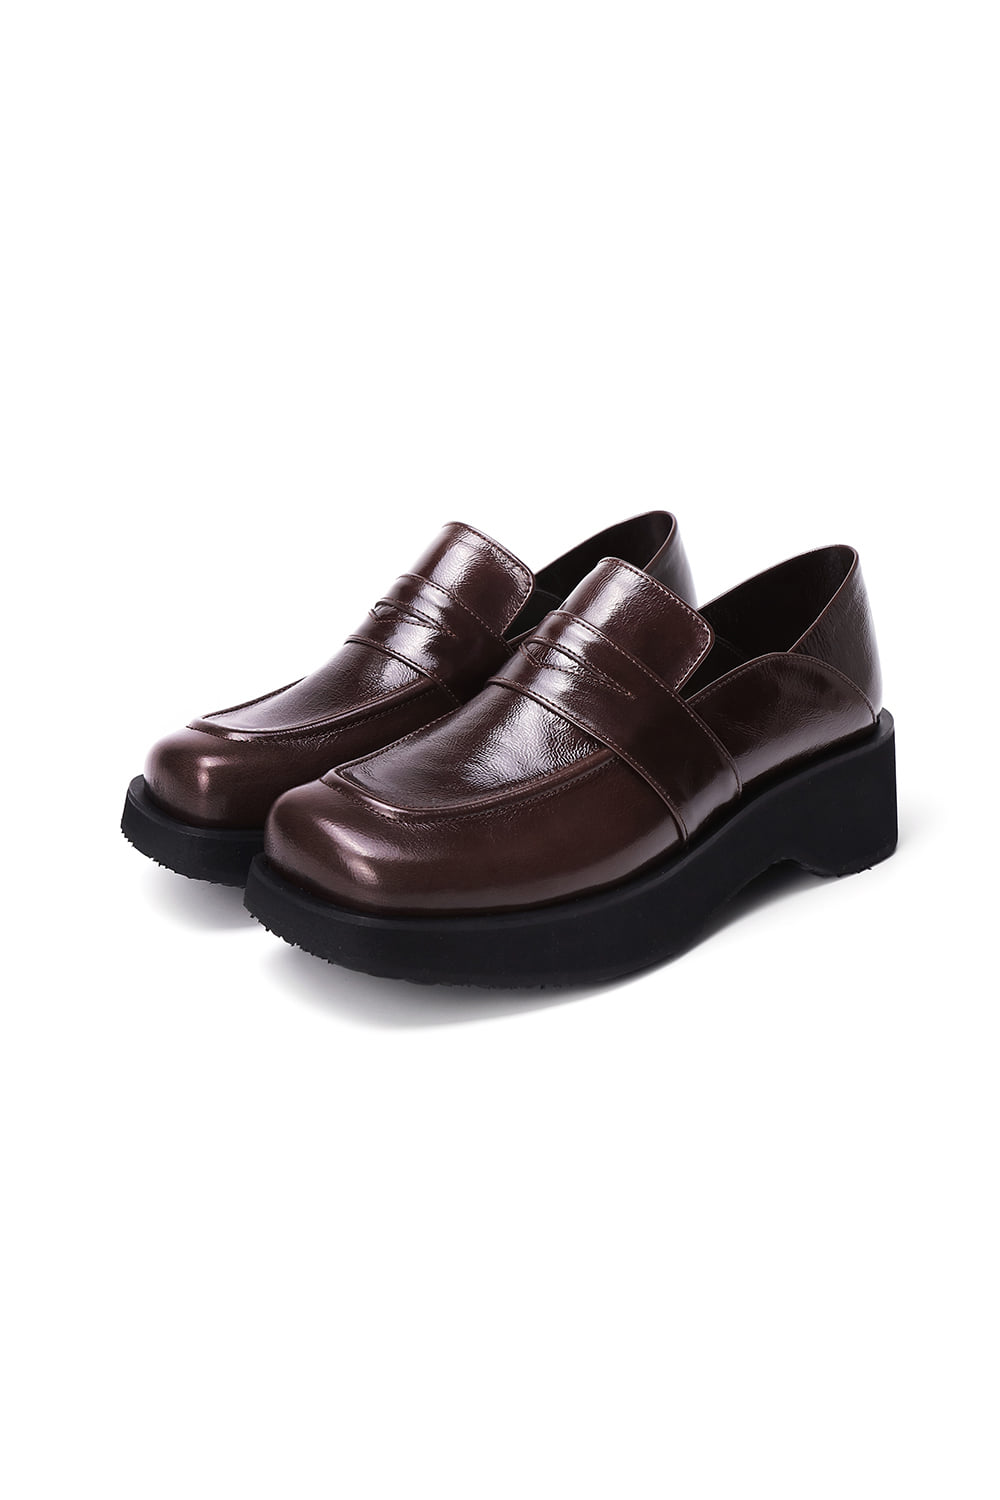 PONY CHUNKY LOAFER [BROWN]